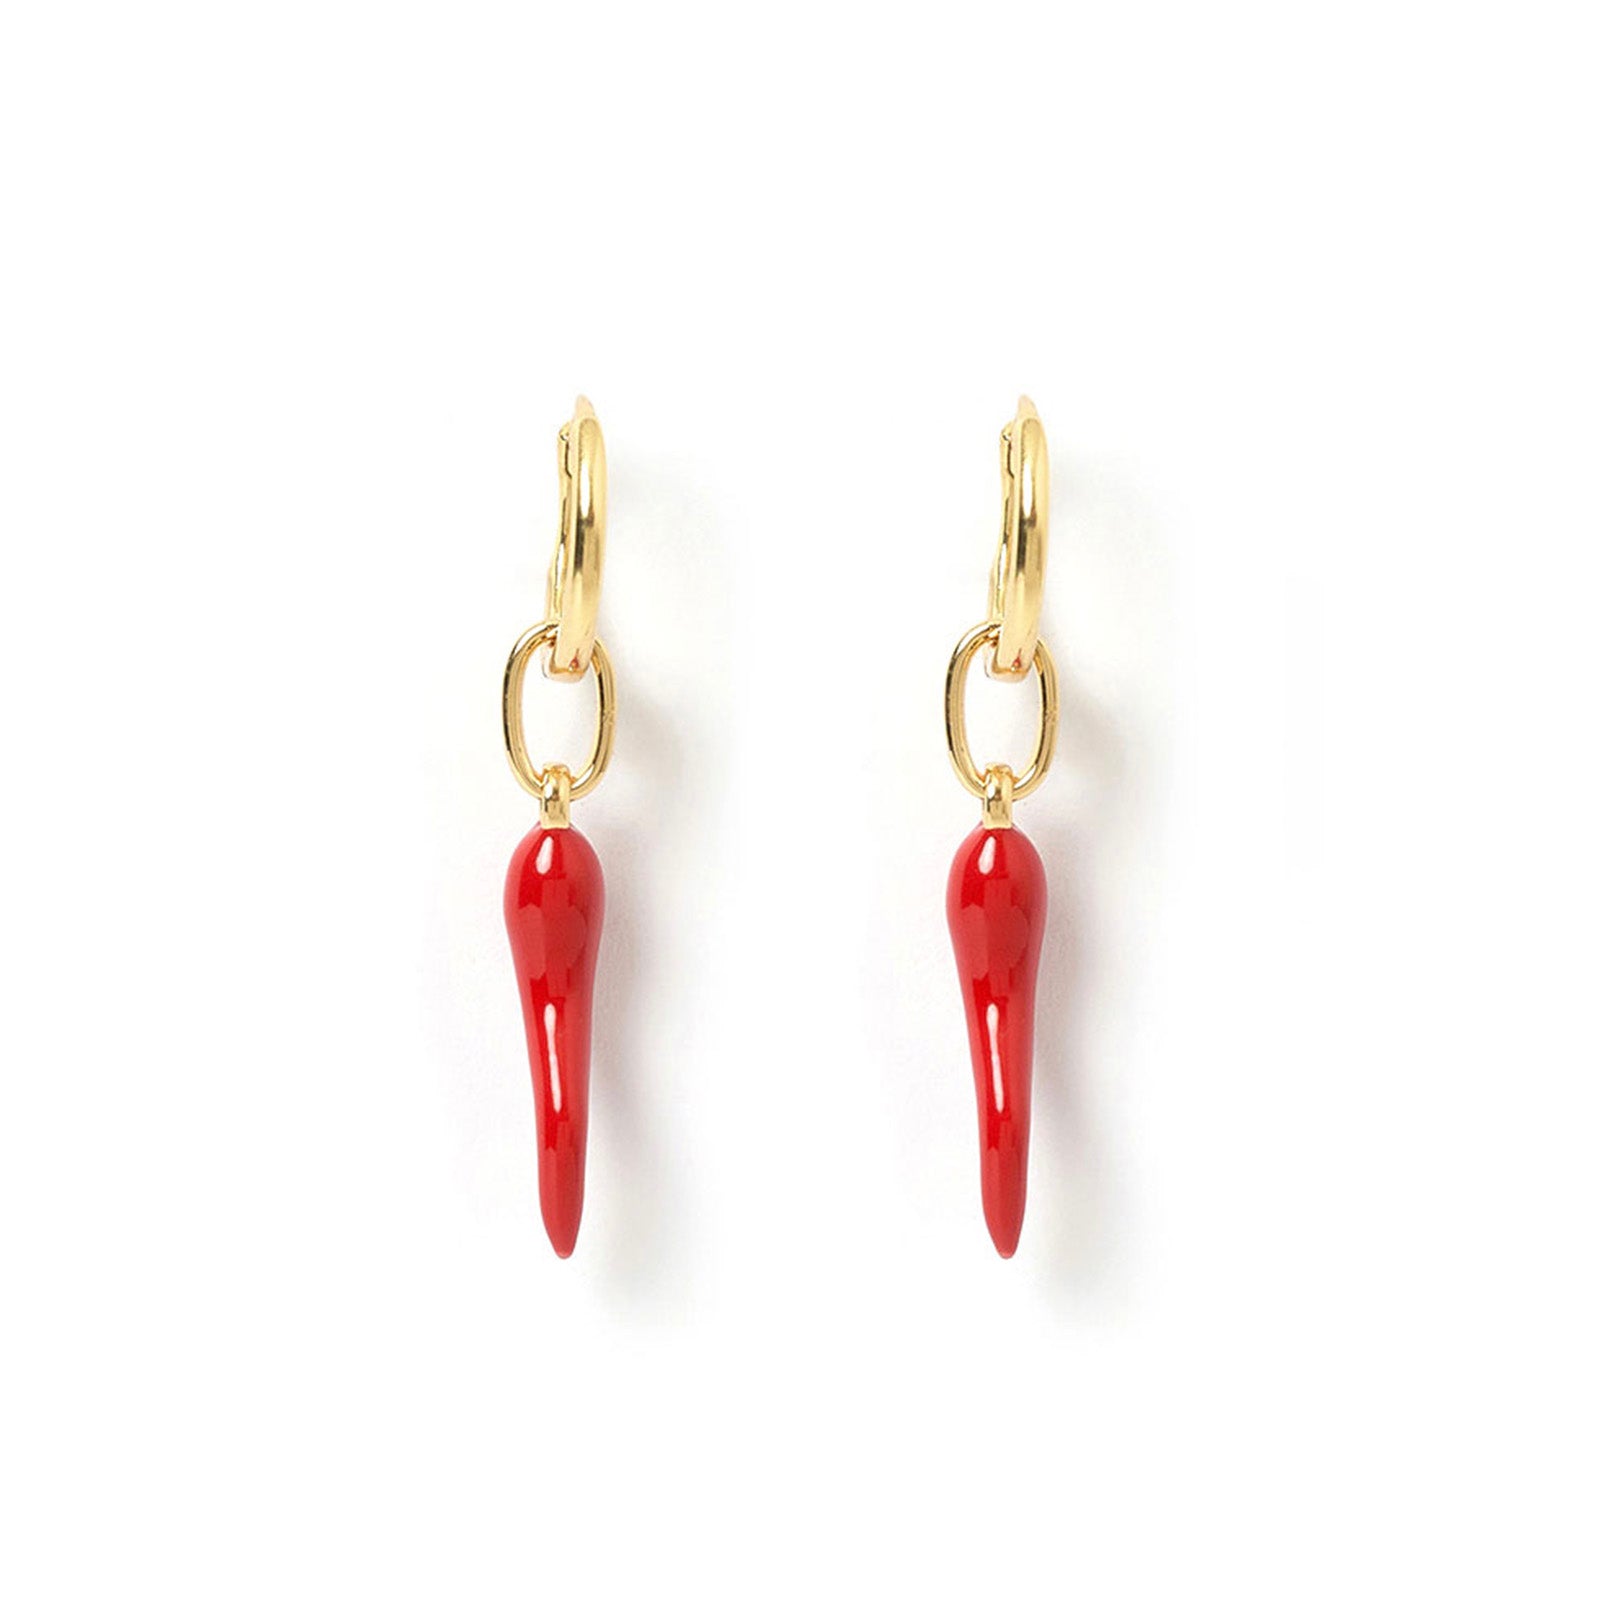 Arms Of Eve unique gold earrings with dangling red Cornicello chili charms for a bold and spicy accessory